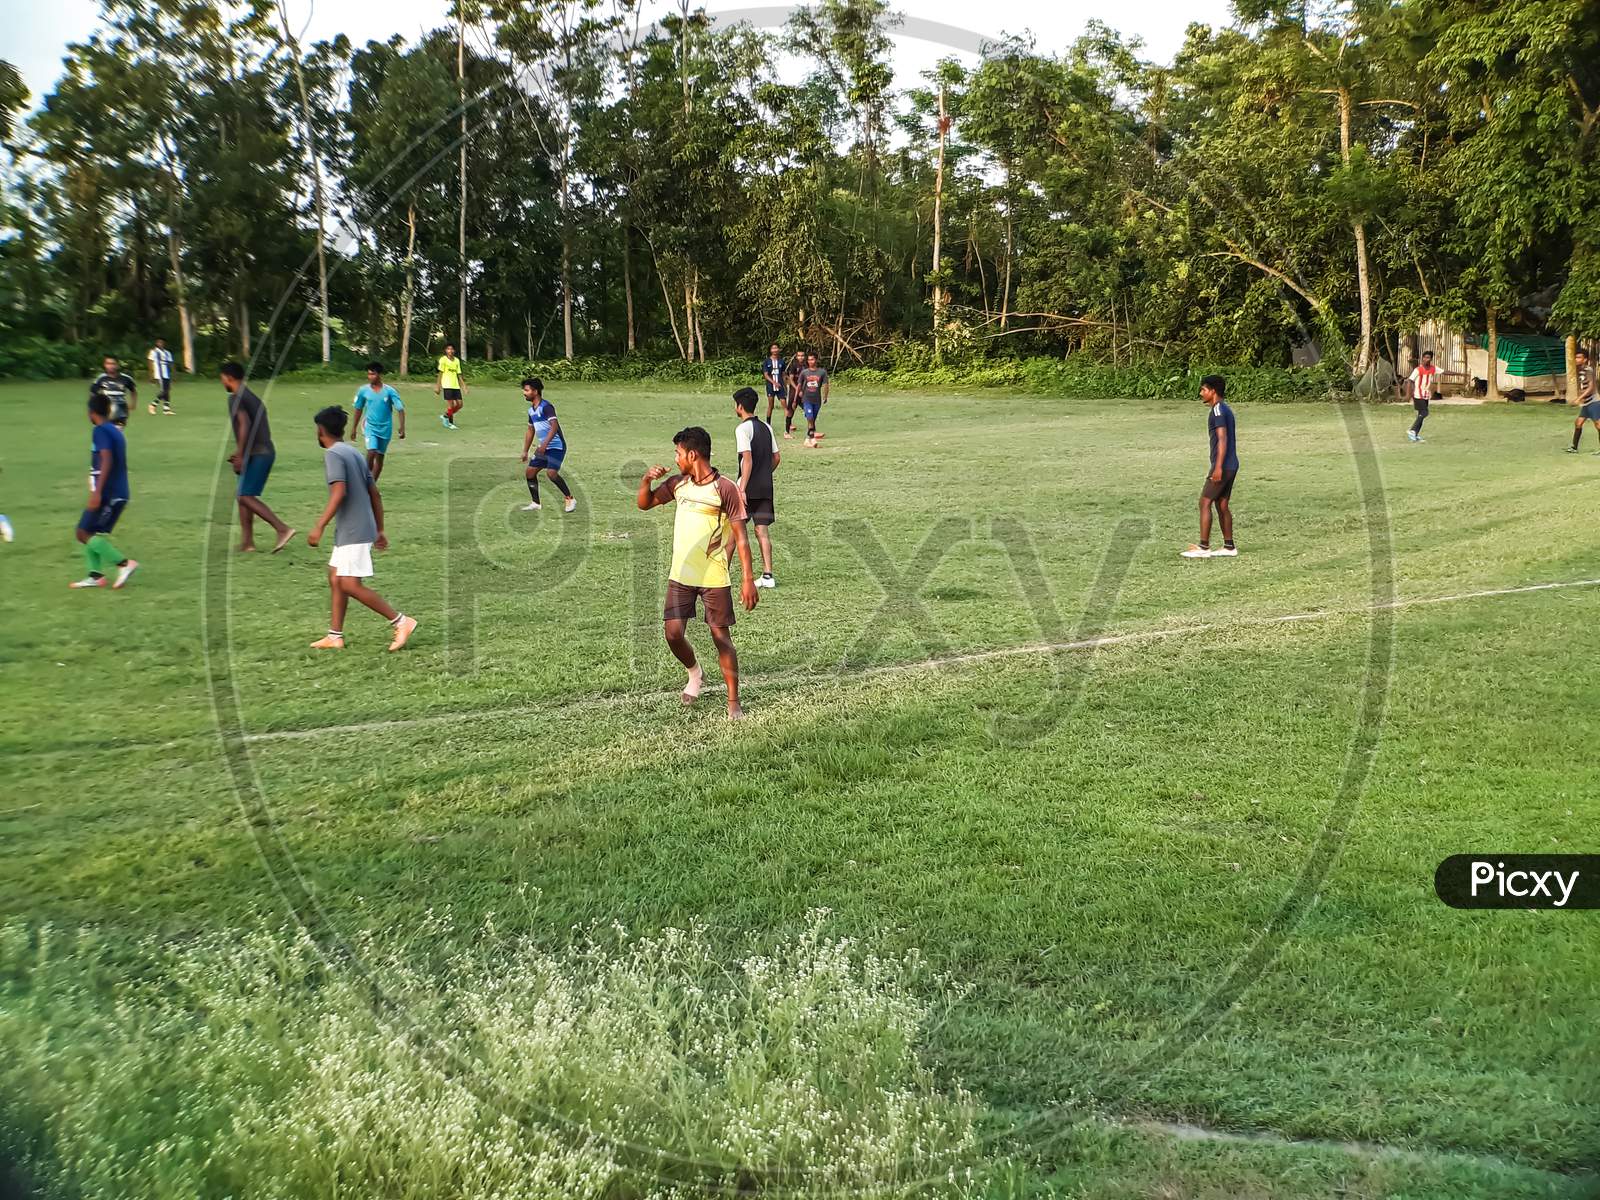 The Boys Are Playing Foot Balls On The Playground. Sports Is A Medium Of Physical Exercise, Foot Ball Is One Of Them.